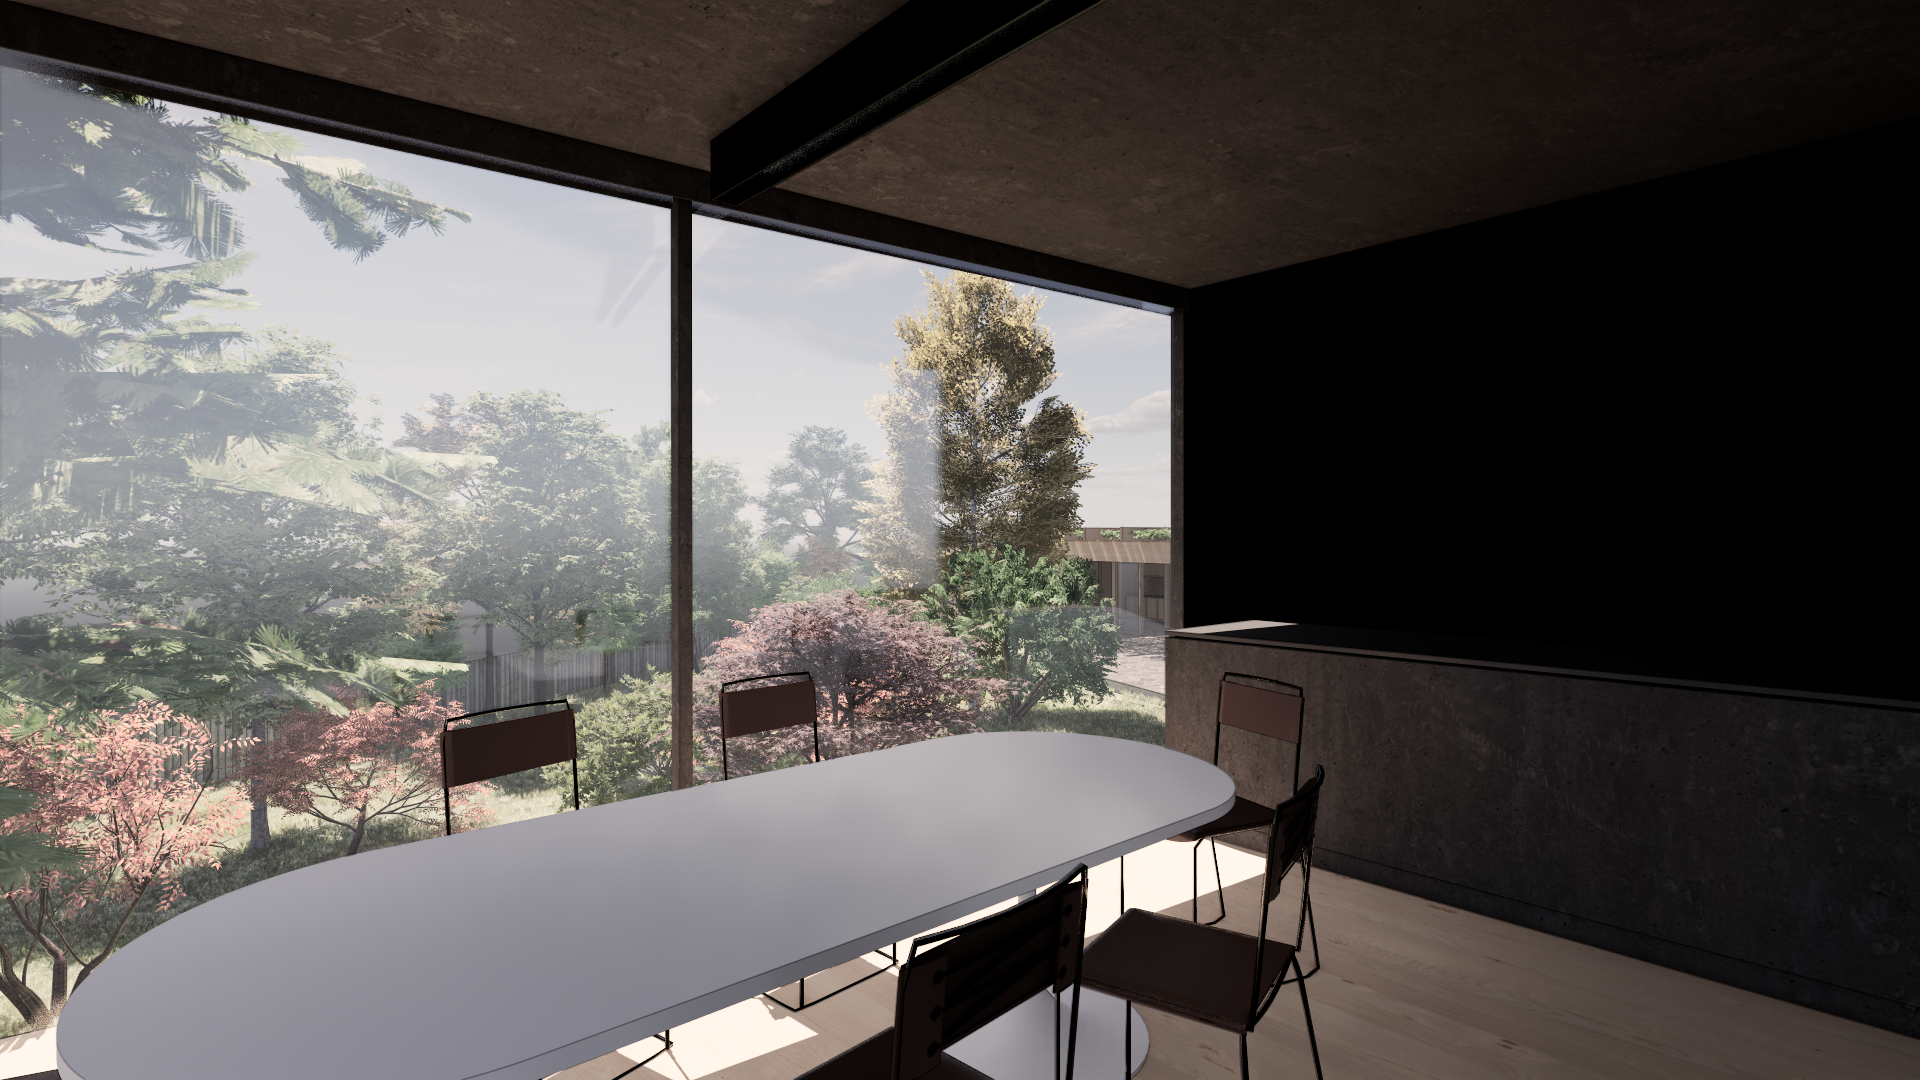 ancher architecture office_juland house_017.png